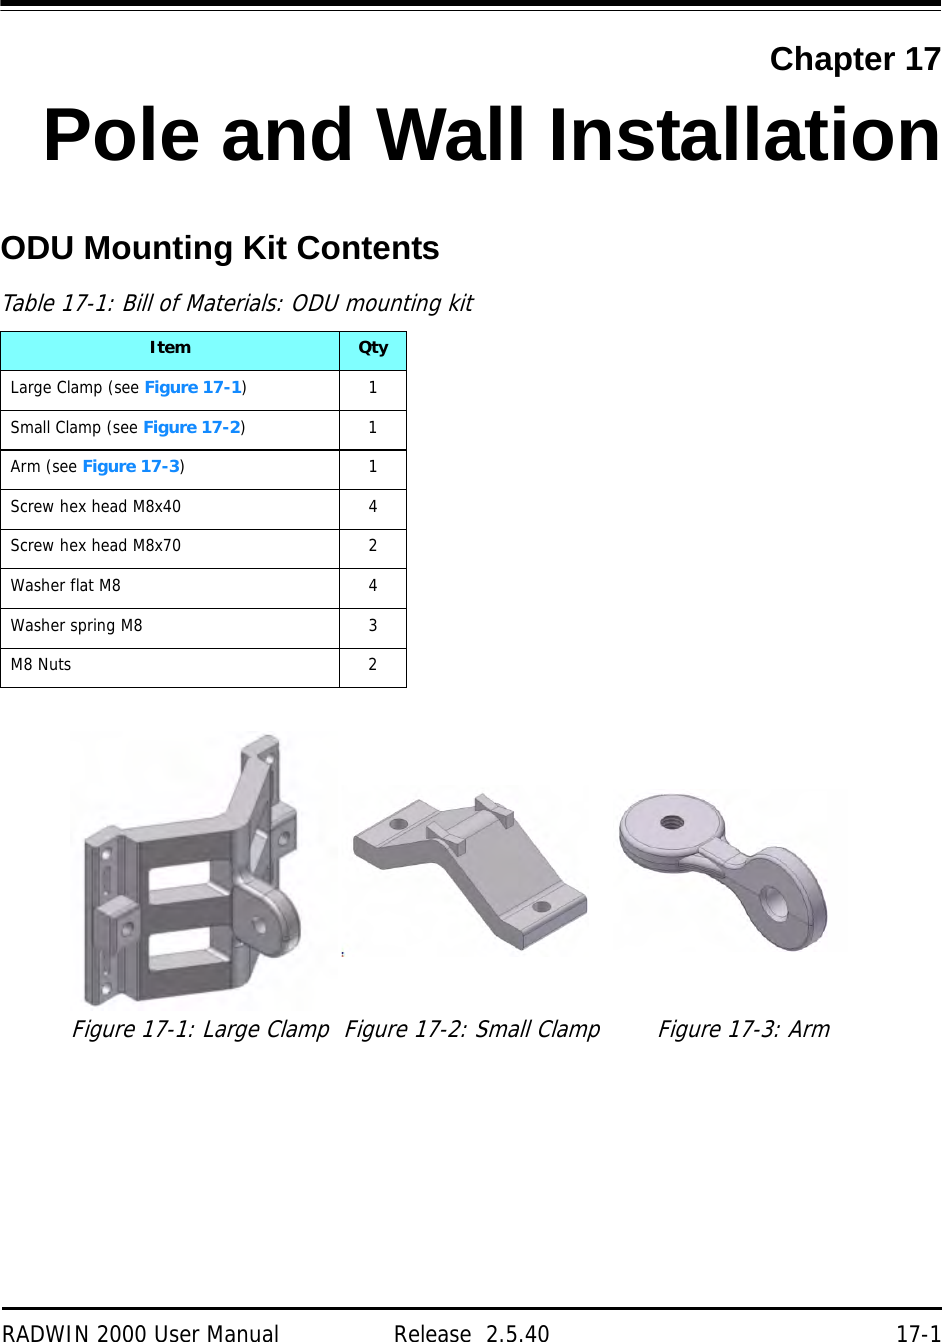 RADWIN 2000 User Manual Release  2.5.40 17-1Chapter 17Pole and Wall InstallationODU Mounting Kit ContentsTable 17-1: Bill of Materials: ODU mounting kitItem QtyLarge Clamp (see Figure 17-1)1Small Clamp (see Figure 17-2)1Arm (see Figure 17-3)1Screw hex head M8x40 4Screw hex head M8x70 2Washer flat M8 4Washer spring M8 3M8 Nuts 2Figure 17-1: Large Clamp Figure 17-2: Small Clamp Figure 17-3: Arm